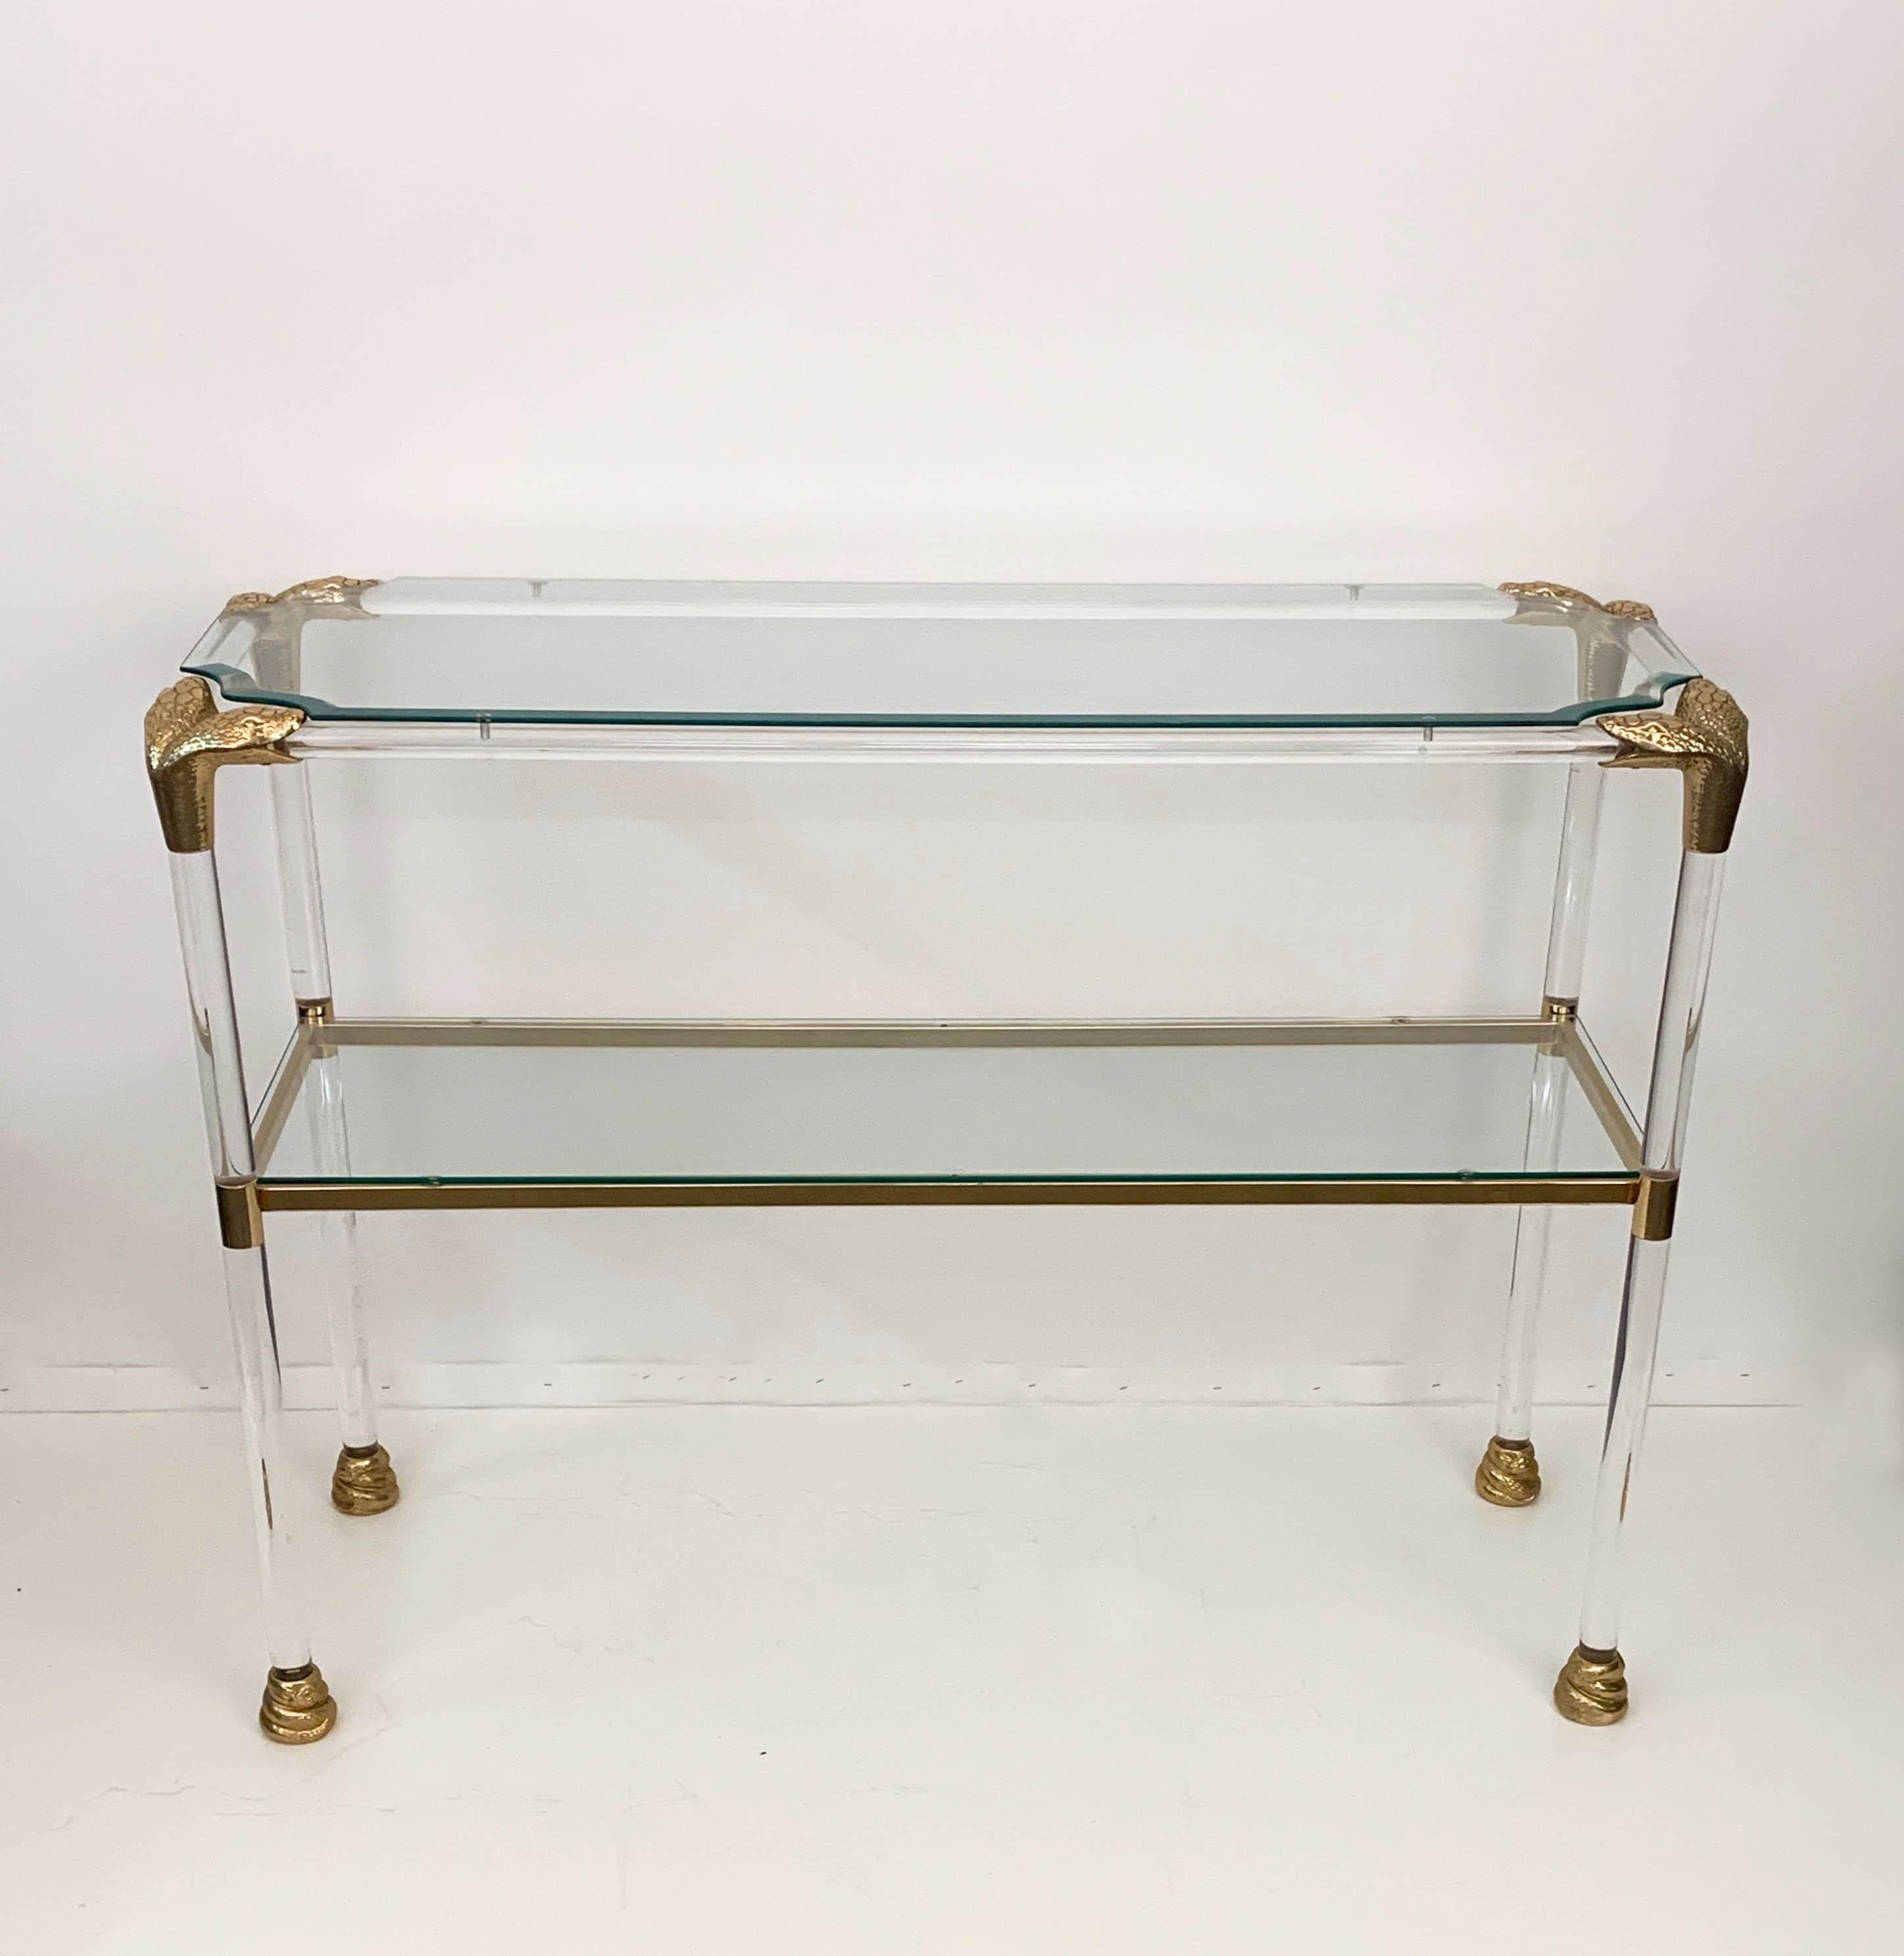 Midcentury Lucite and Brass Italian Console Table with Snake Head Finishes 1970s 5